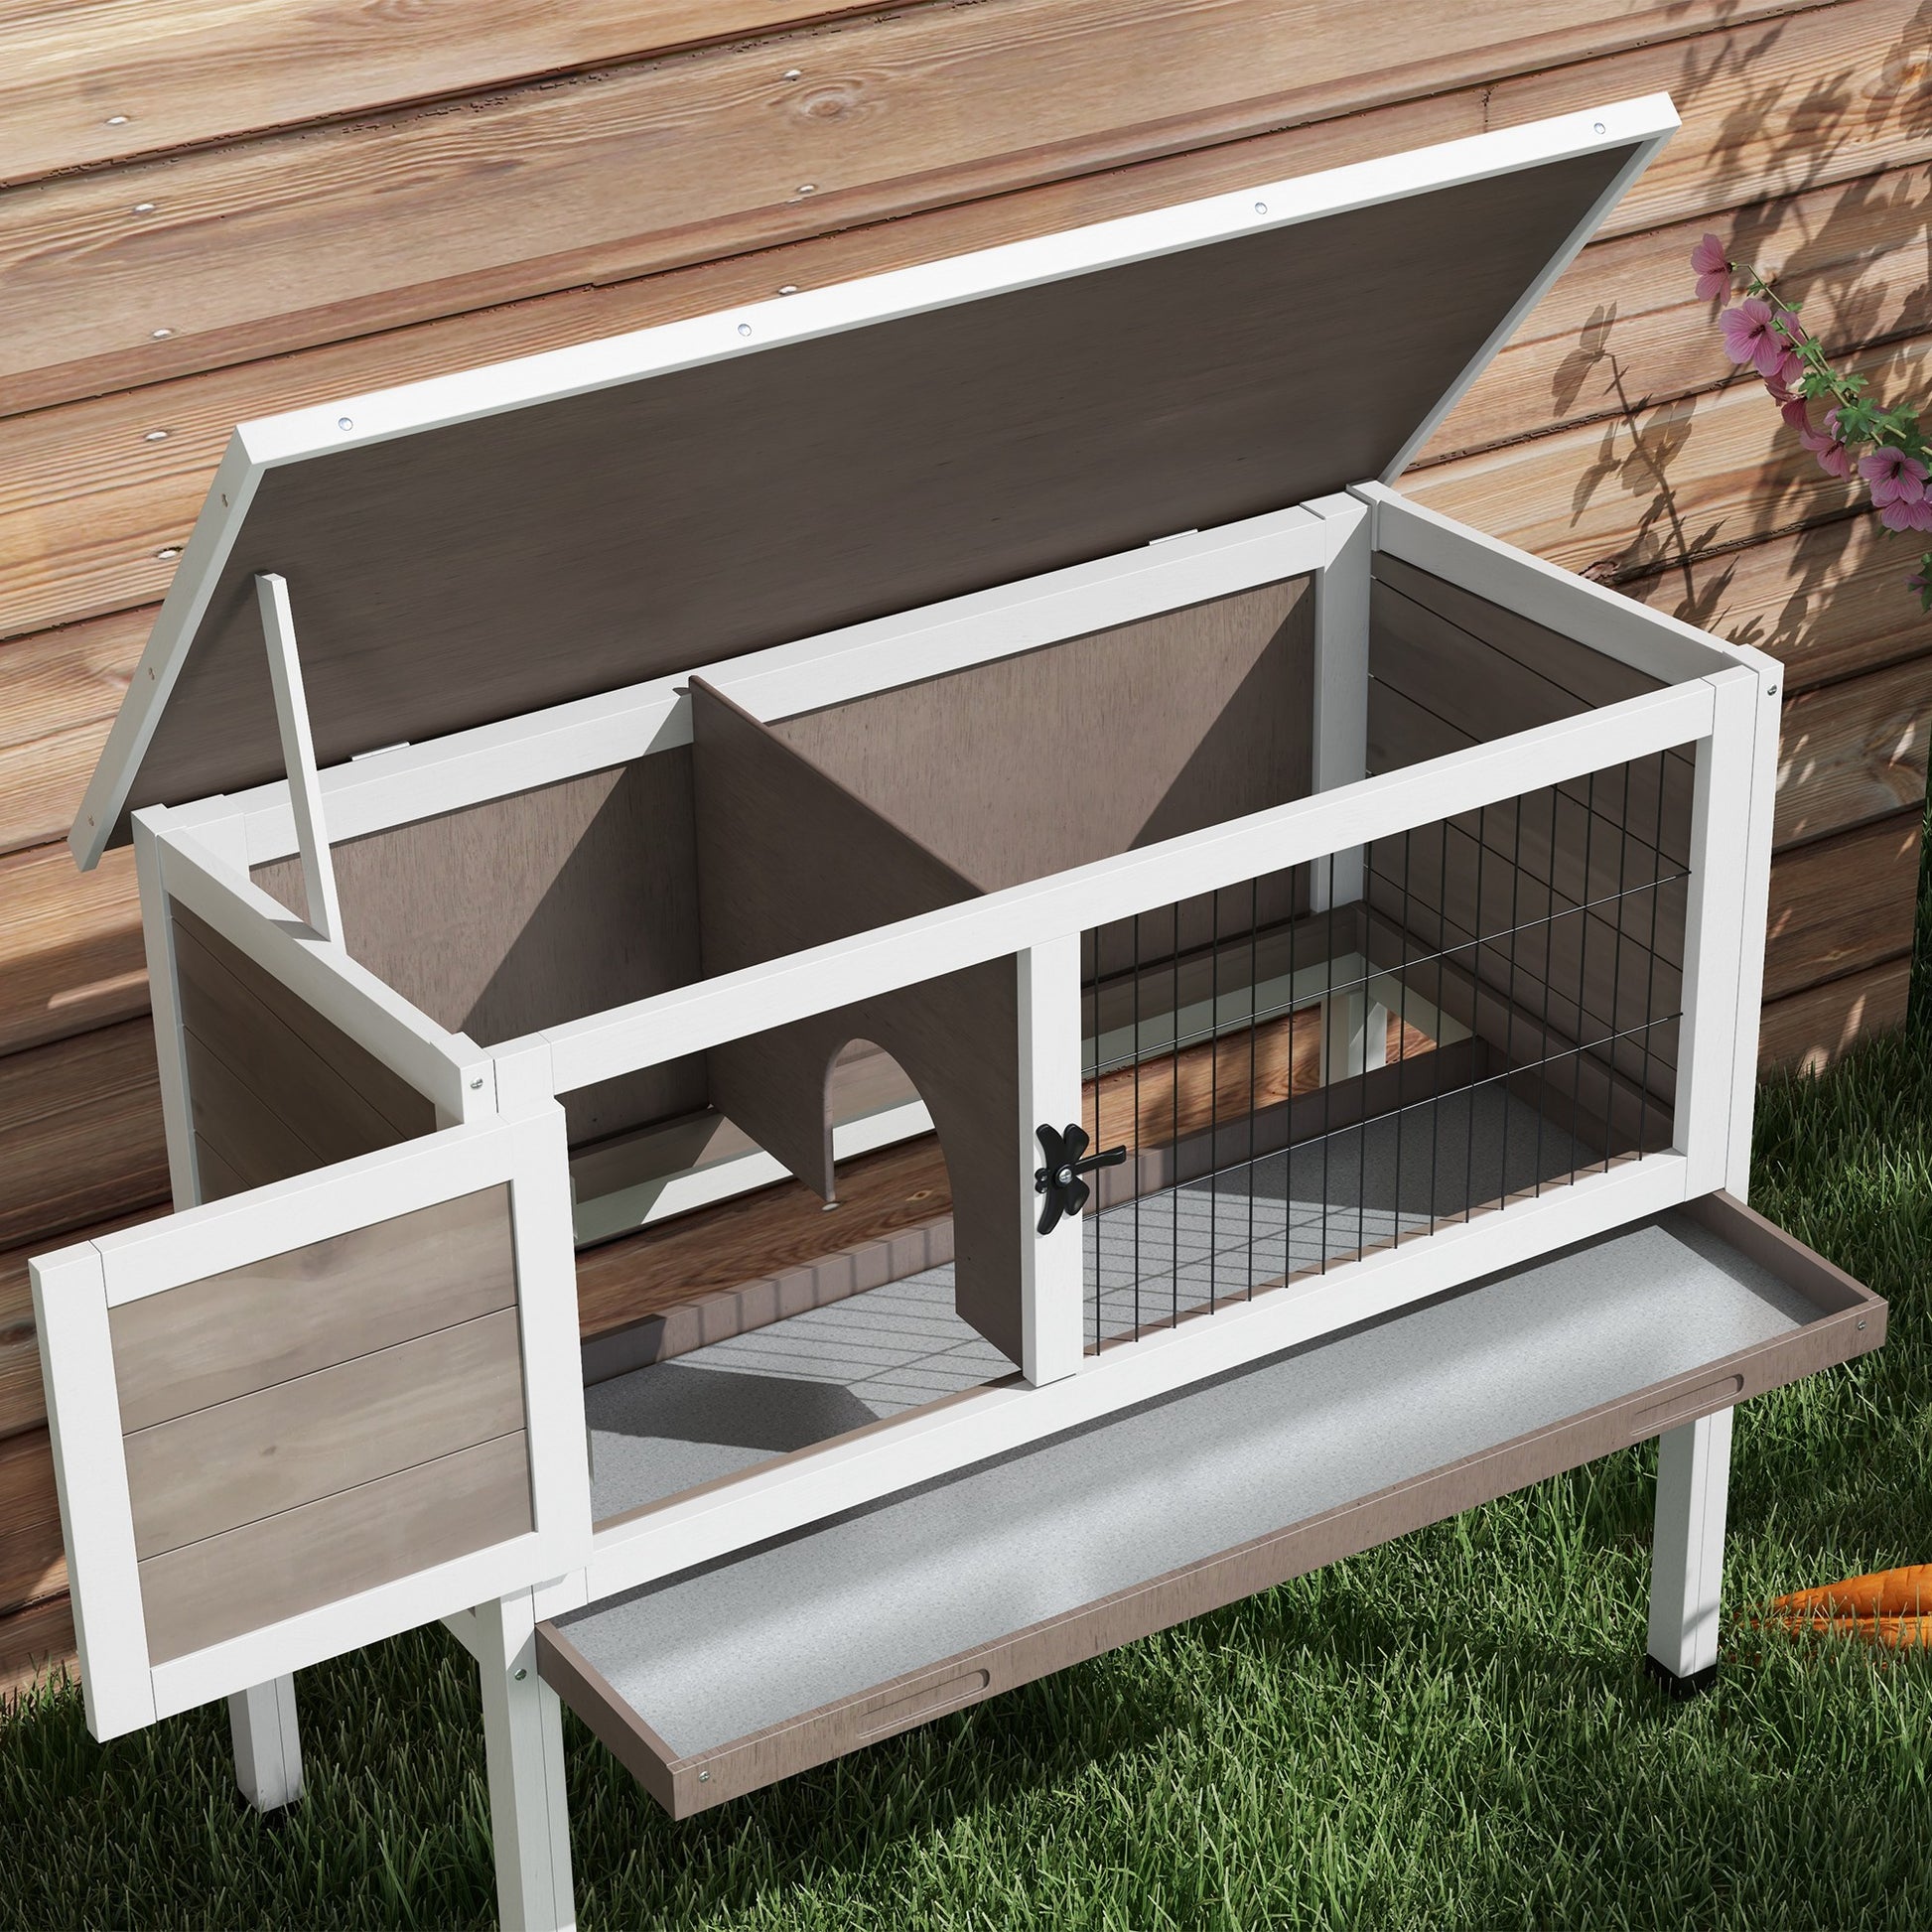 Wooden Rabbit Hutch with Openable Asphalt Roof, Tray, Brown at Gallery Canada